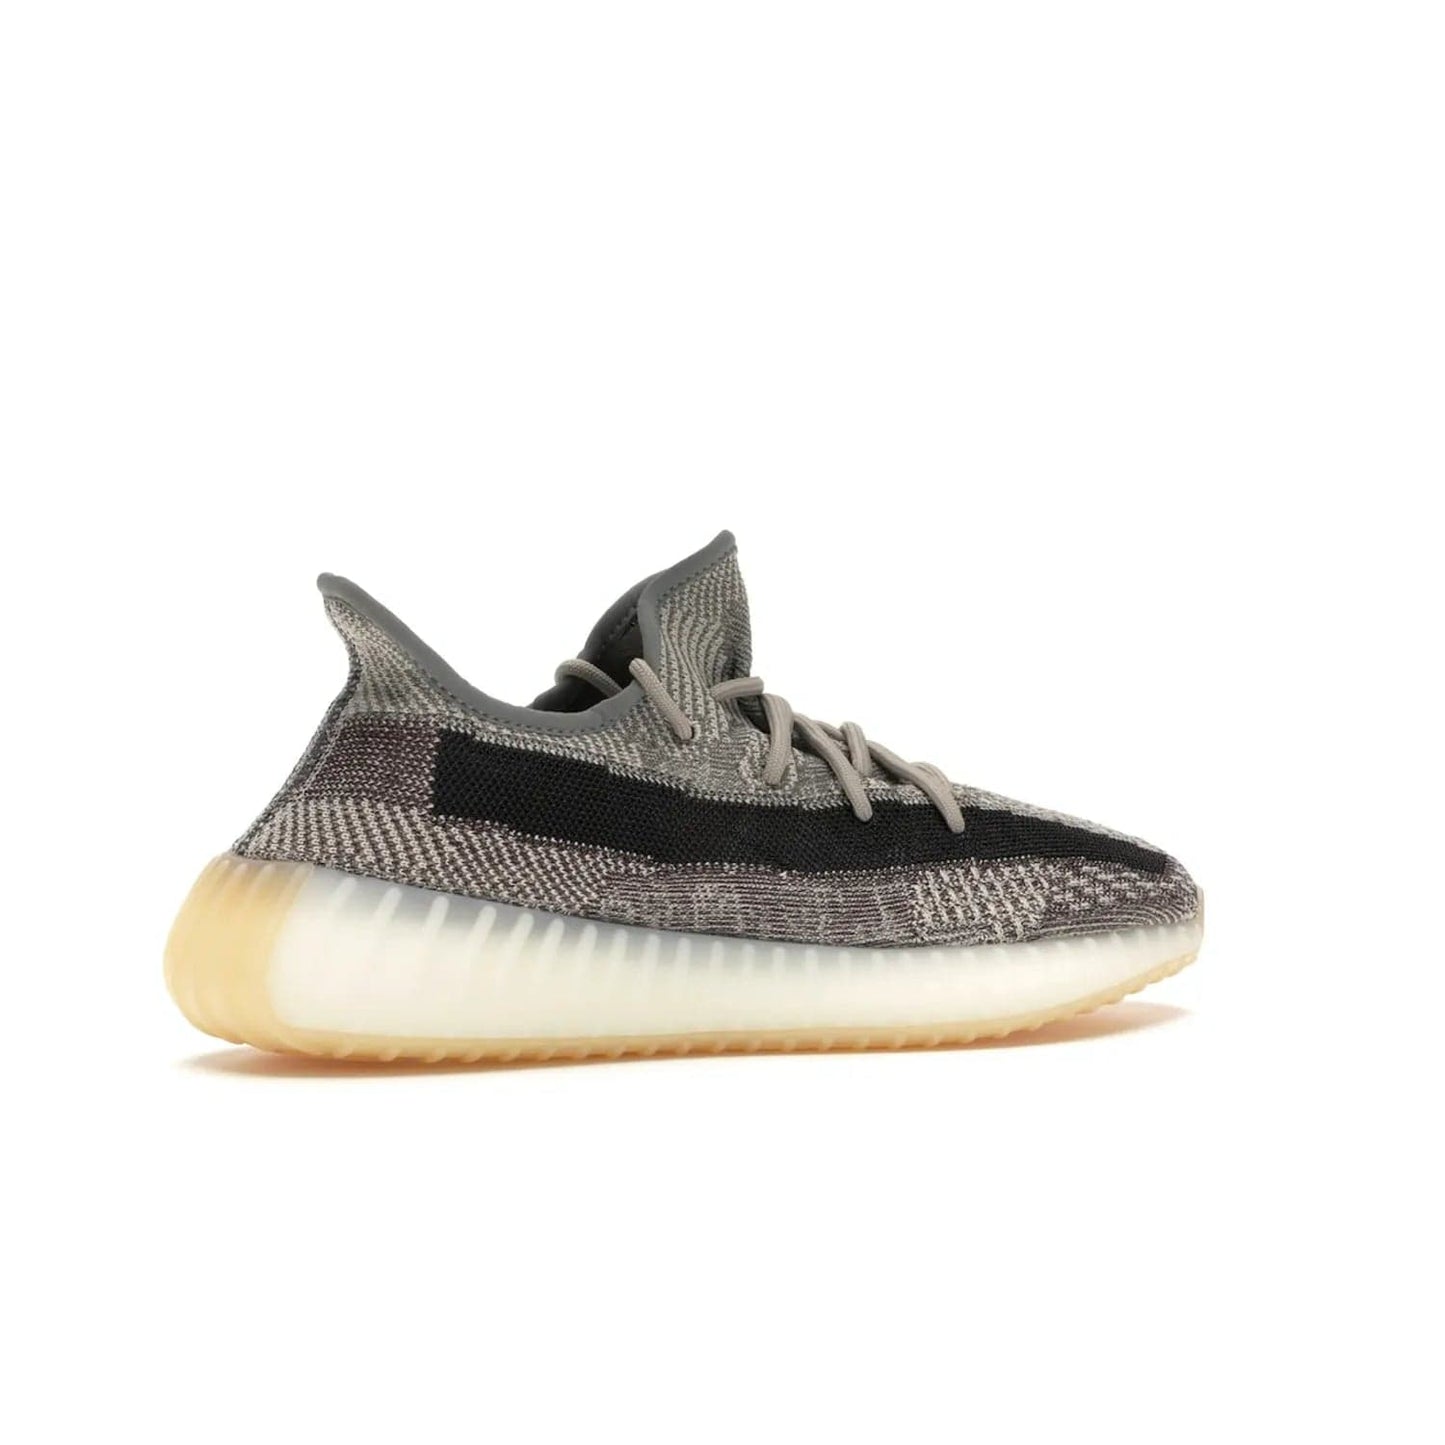 adidas Yeezy Boost 350 V2 Zyon - Image 34 - Only at www.BallersClubKickz.com - Step up your style game with the adidas Yeezy Boost 350 V2 Zyon. This sleek sneaker features a Primeknit upper, dark side stripe, translucent Boost sole, and creamy white interior providing style and comfort. Get them now!